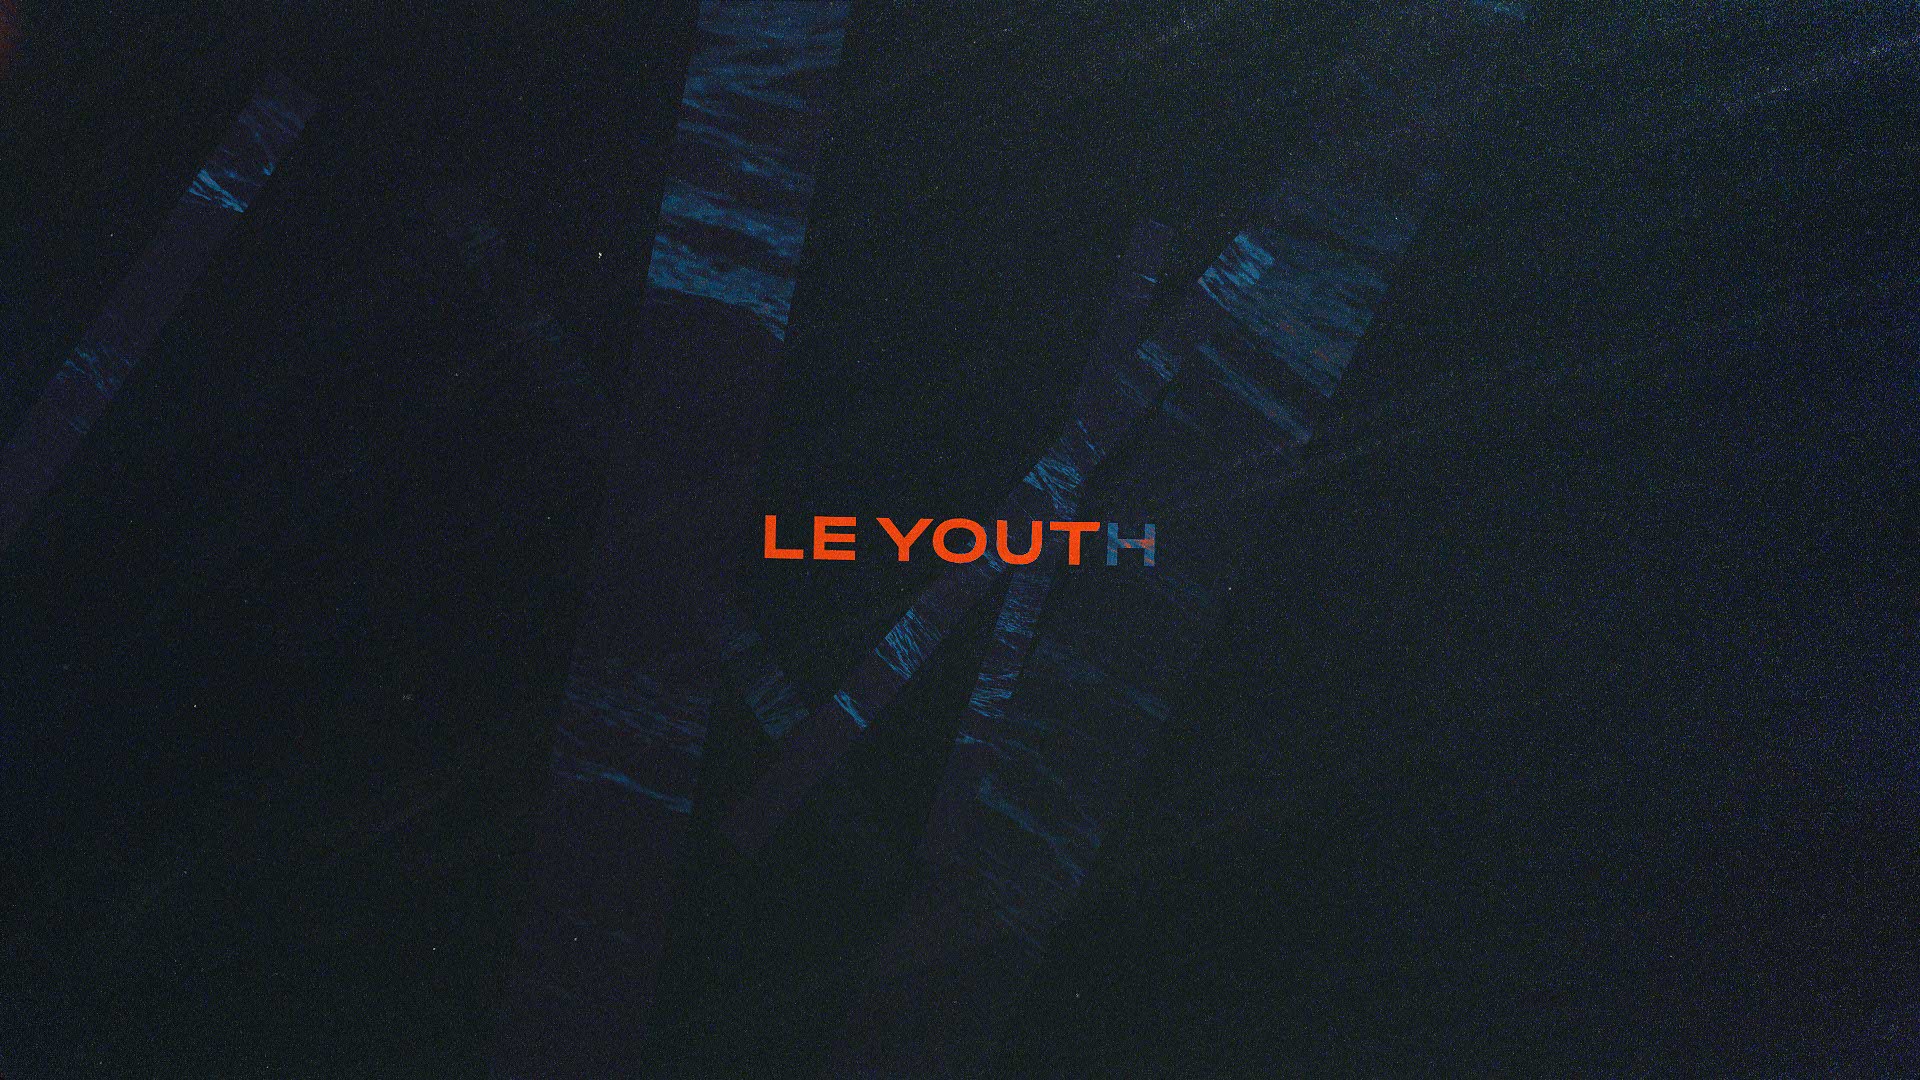 Le-youth-Tour-Visuals-Article_T1-1-Le-Youth-Tour-Visual_2023-07-03_21.14.59